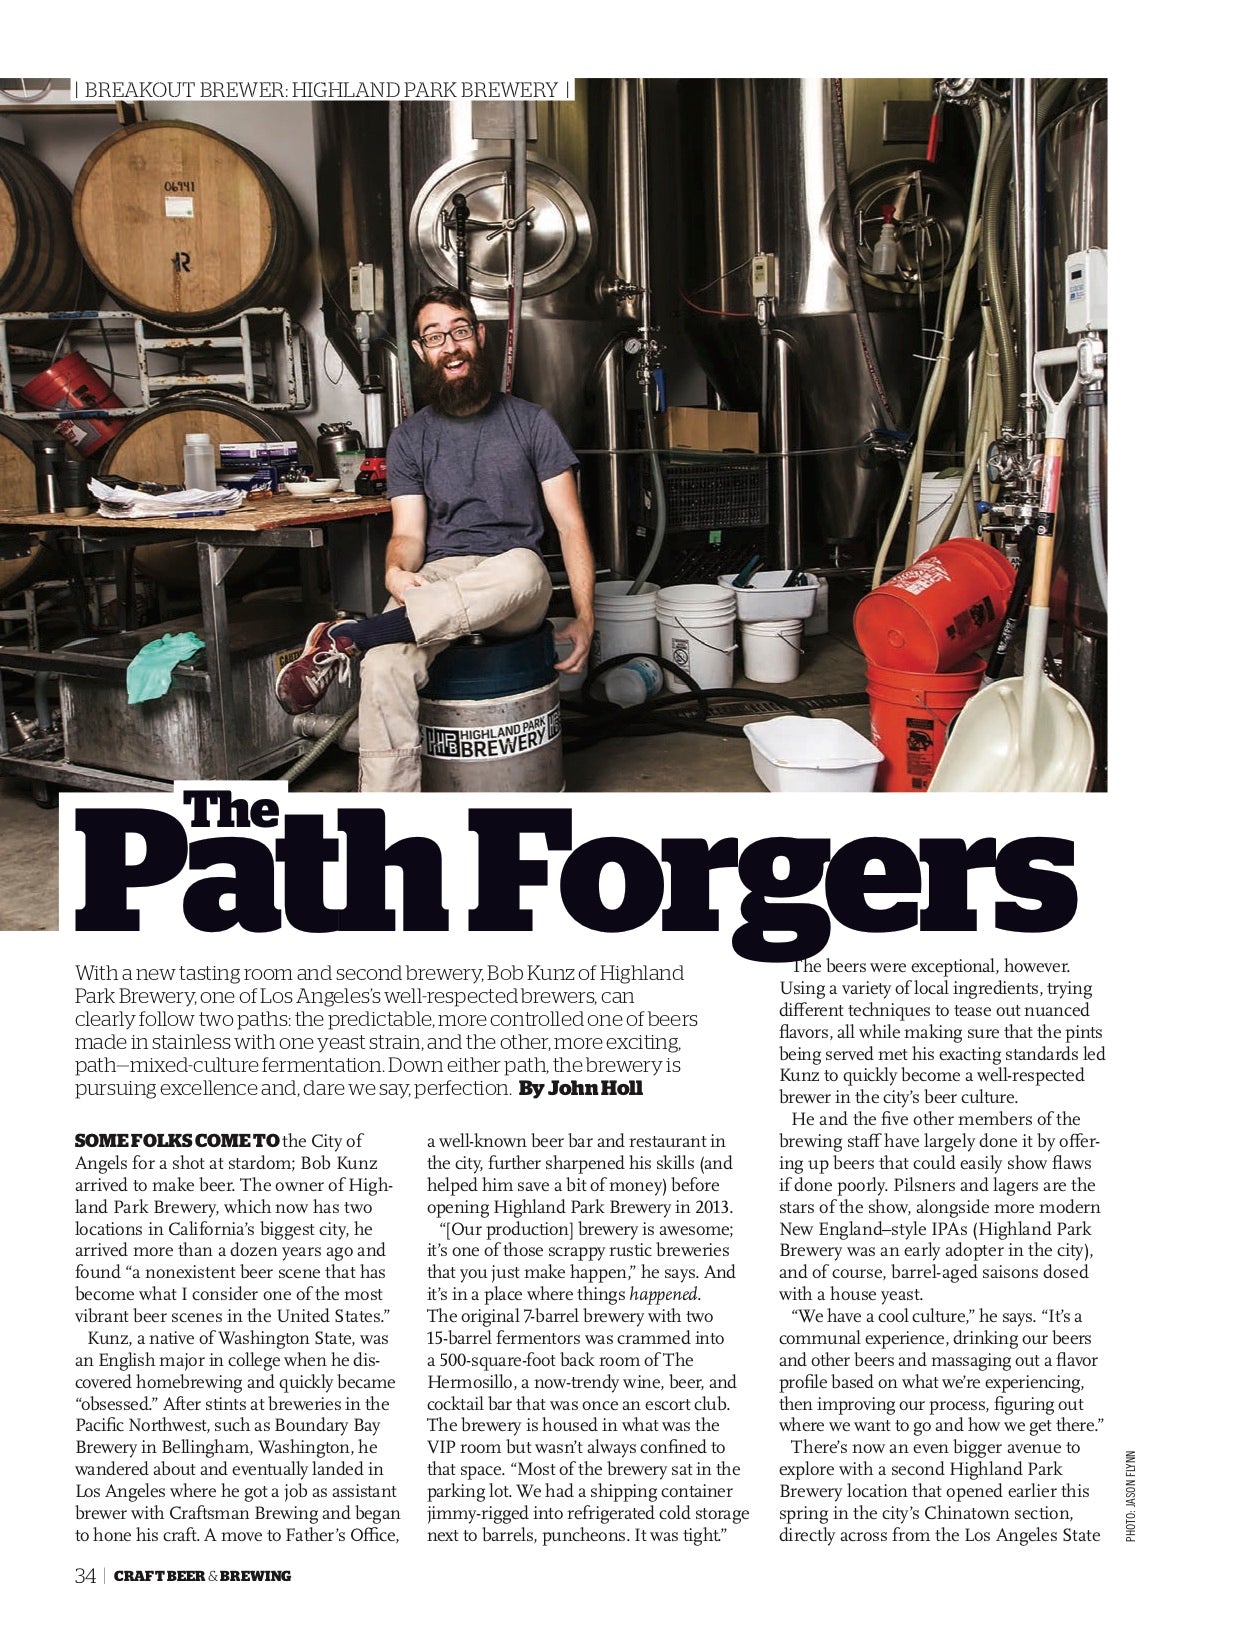 The Next IPA (August-September 2018 Issue) - Craft Beer & Brewing